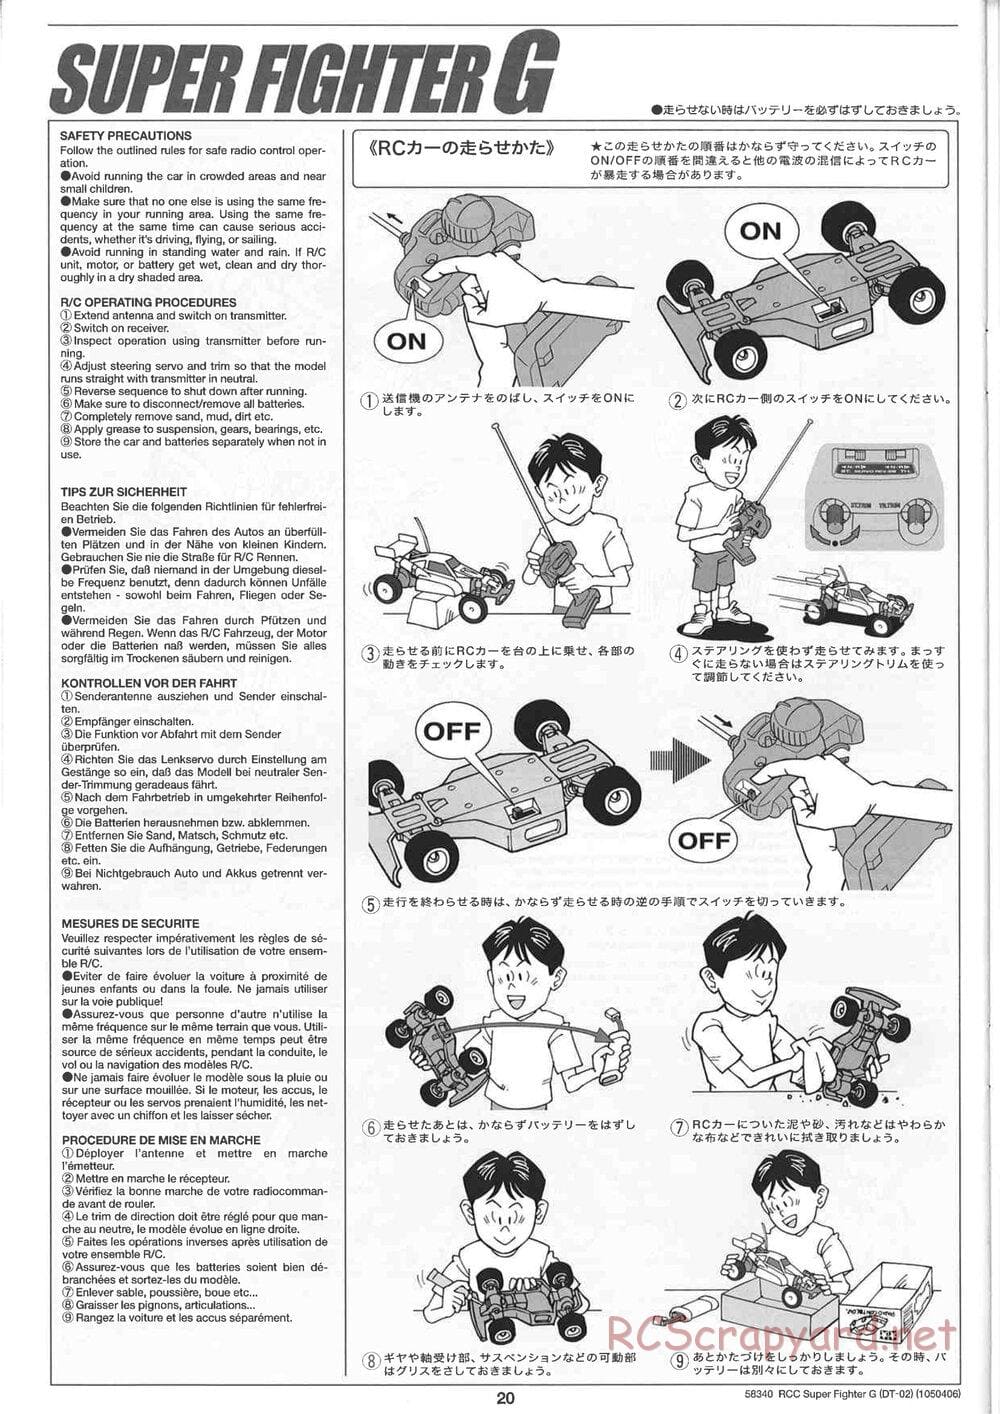 Tamiya - Super Fighter G Chassis - Manual - Page 20